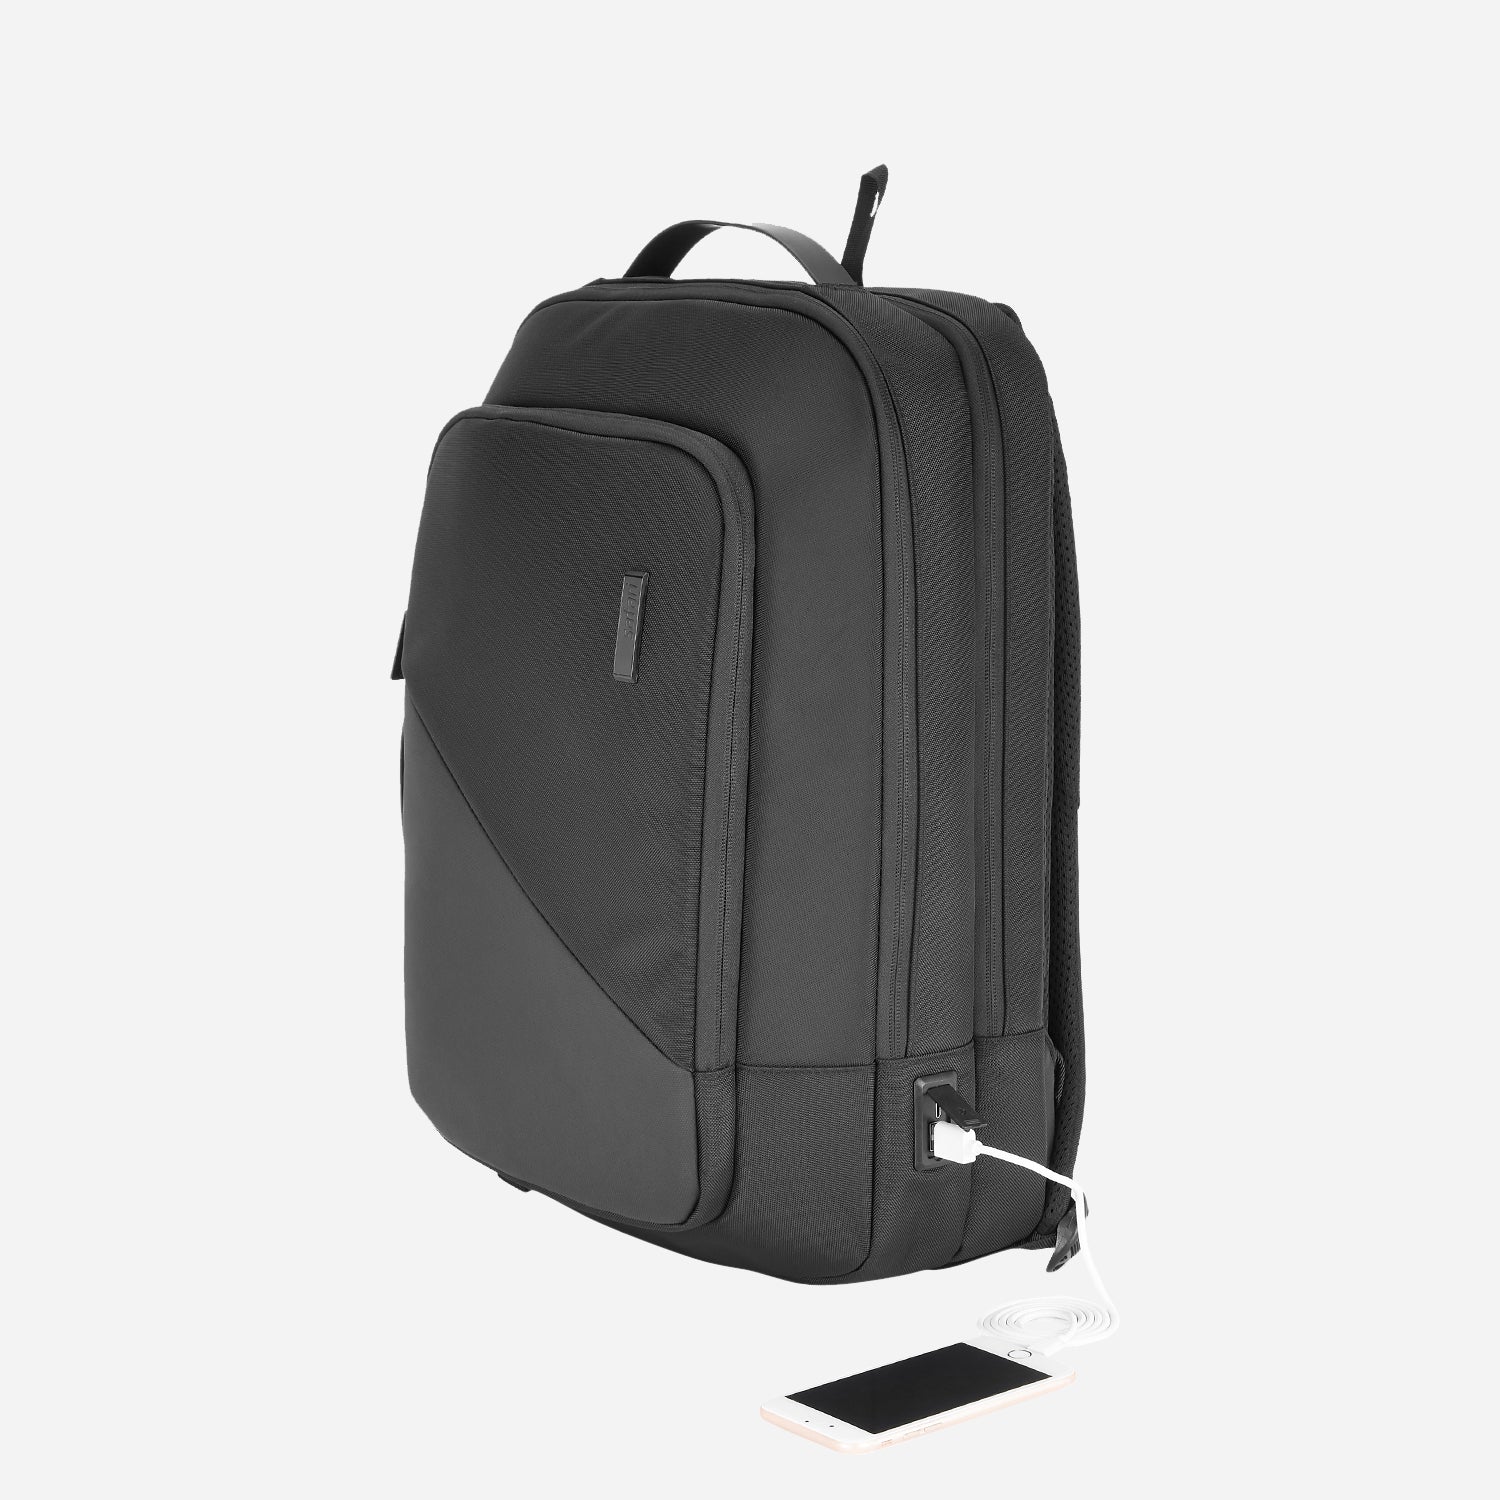 Sage Formal Backpack with USB Port, Premium Fabric, Multiple Handles and Sunglass Loop- Black